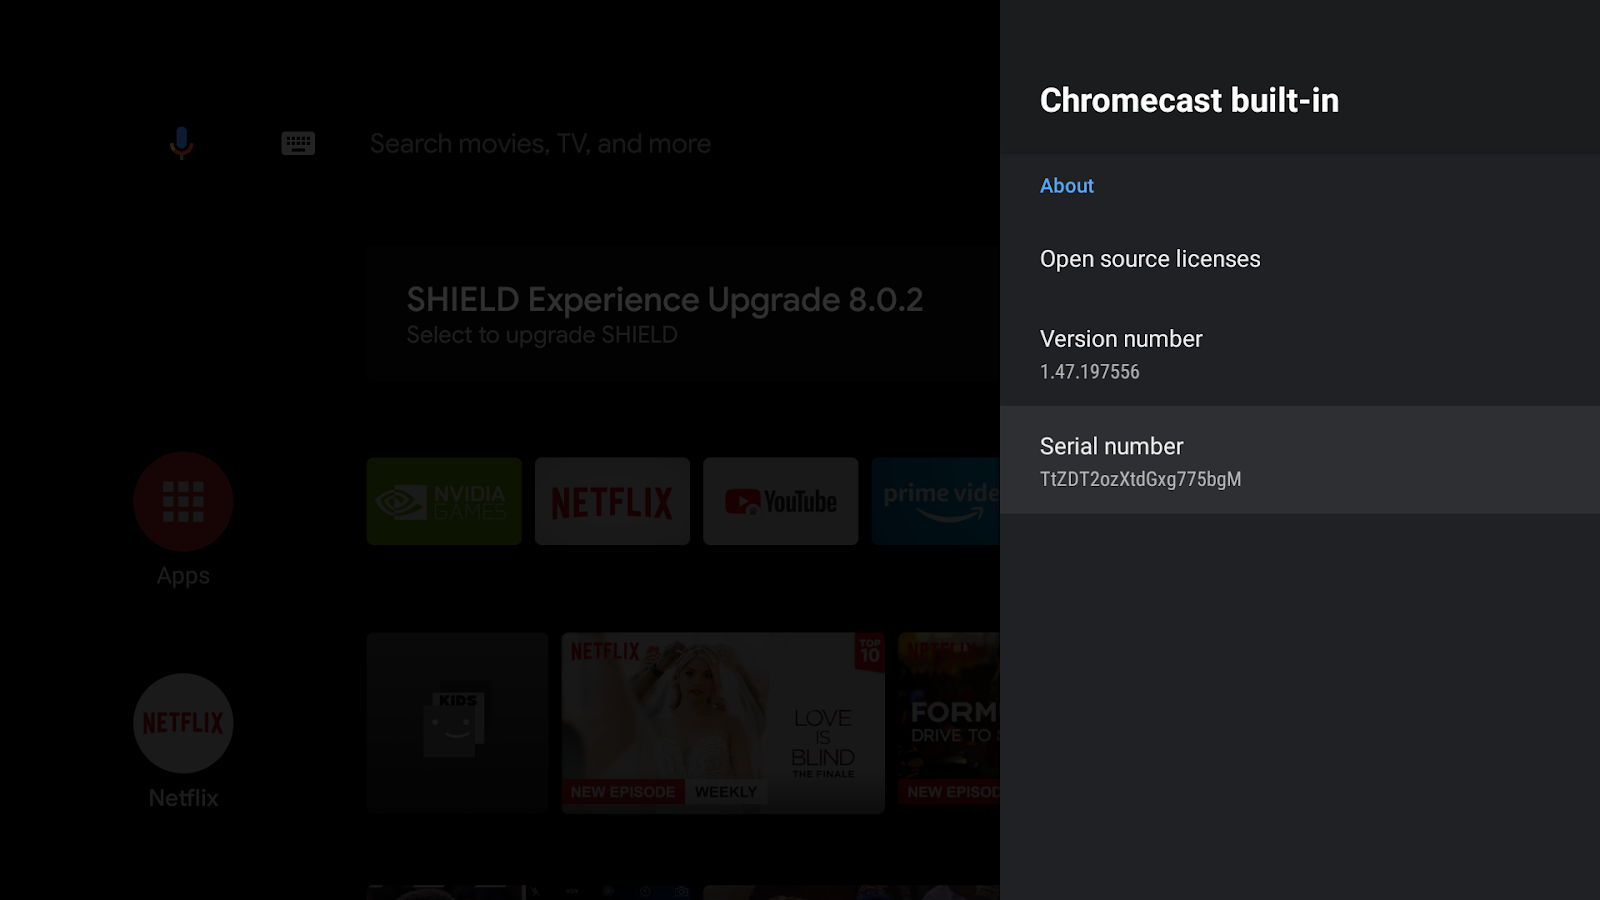 Image of an Android TV screen showing the 'Chromecast built-in' screen, the Version number and Serial number